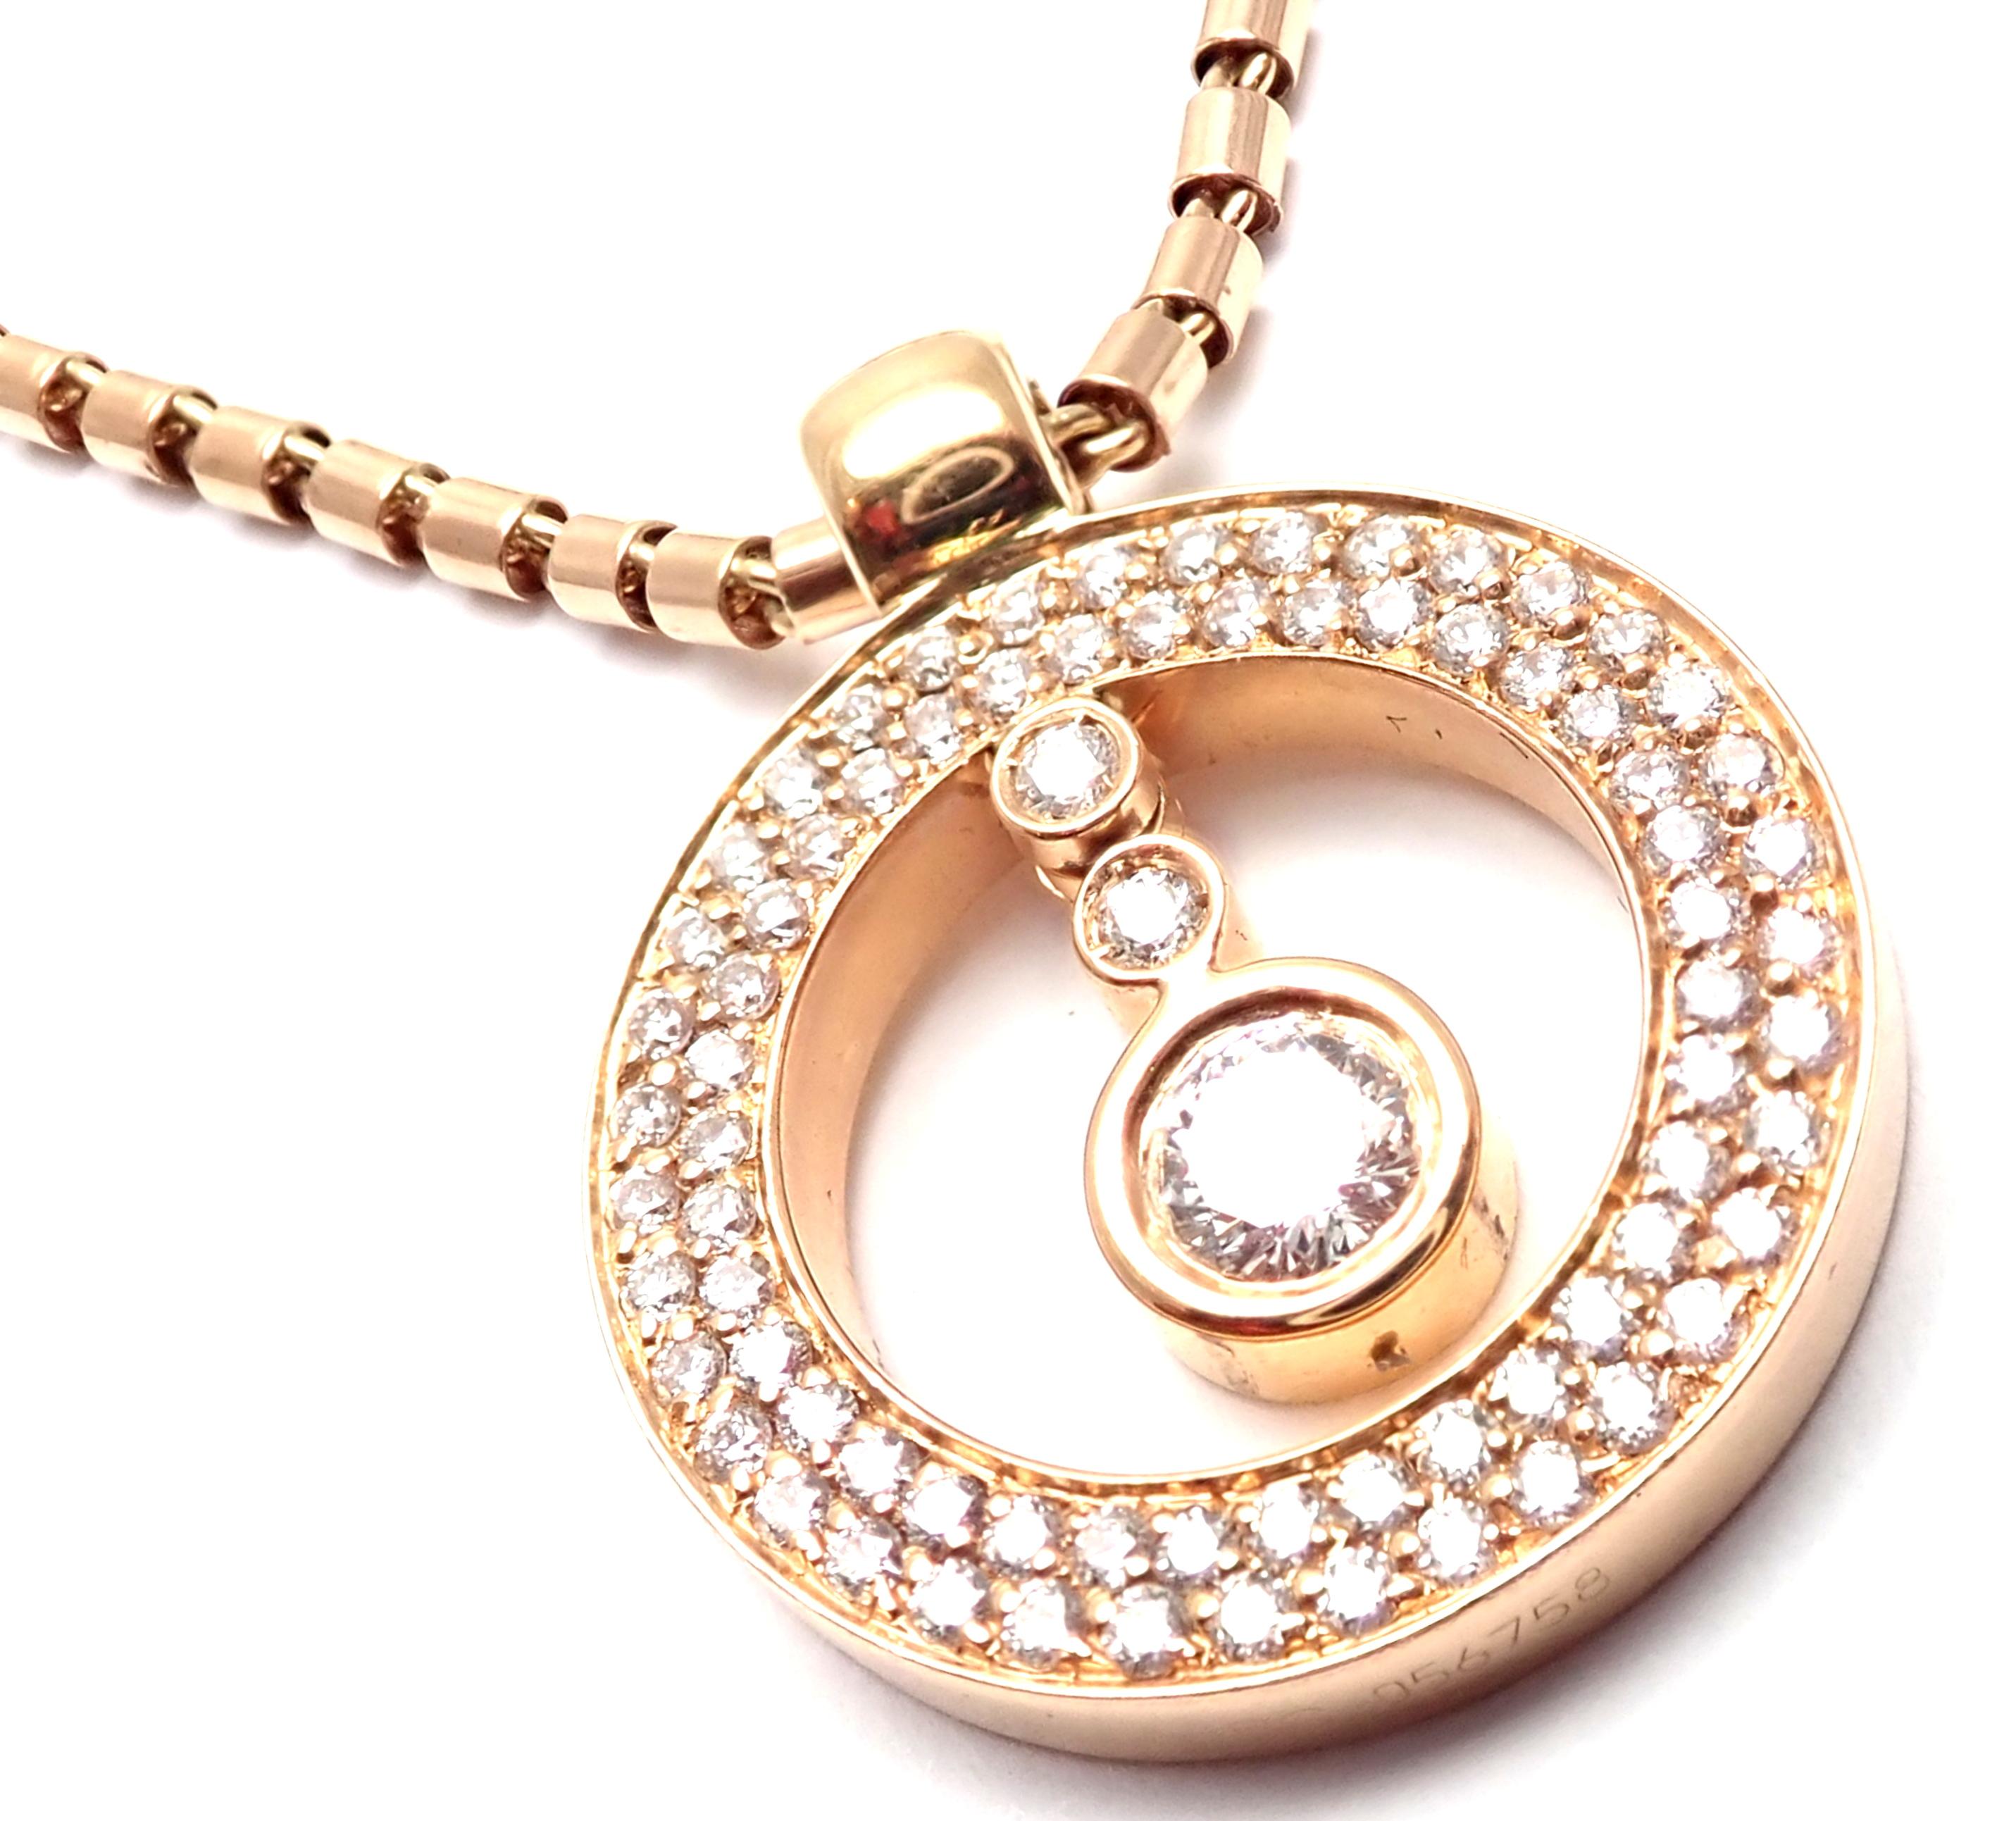 18k Rose Gold Cento Diamond Ruby Pendant Necklace by Roberto Coin. 
With 1Round brilliant cut diamonds total weight approx. .80ct
2 rubies
Details: 
Necklace: Length: 18